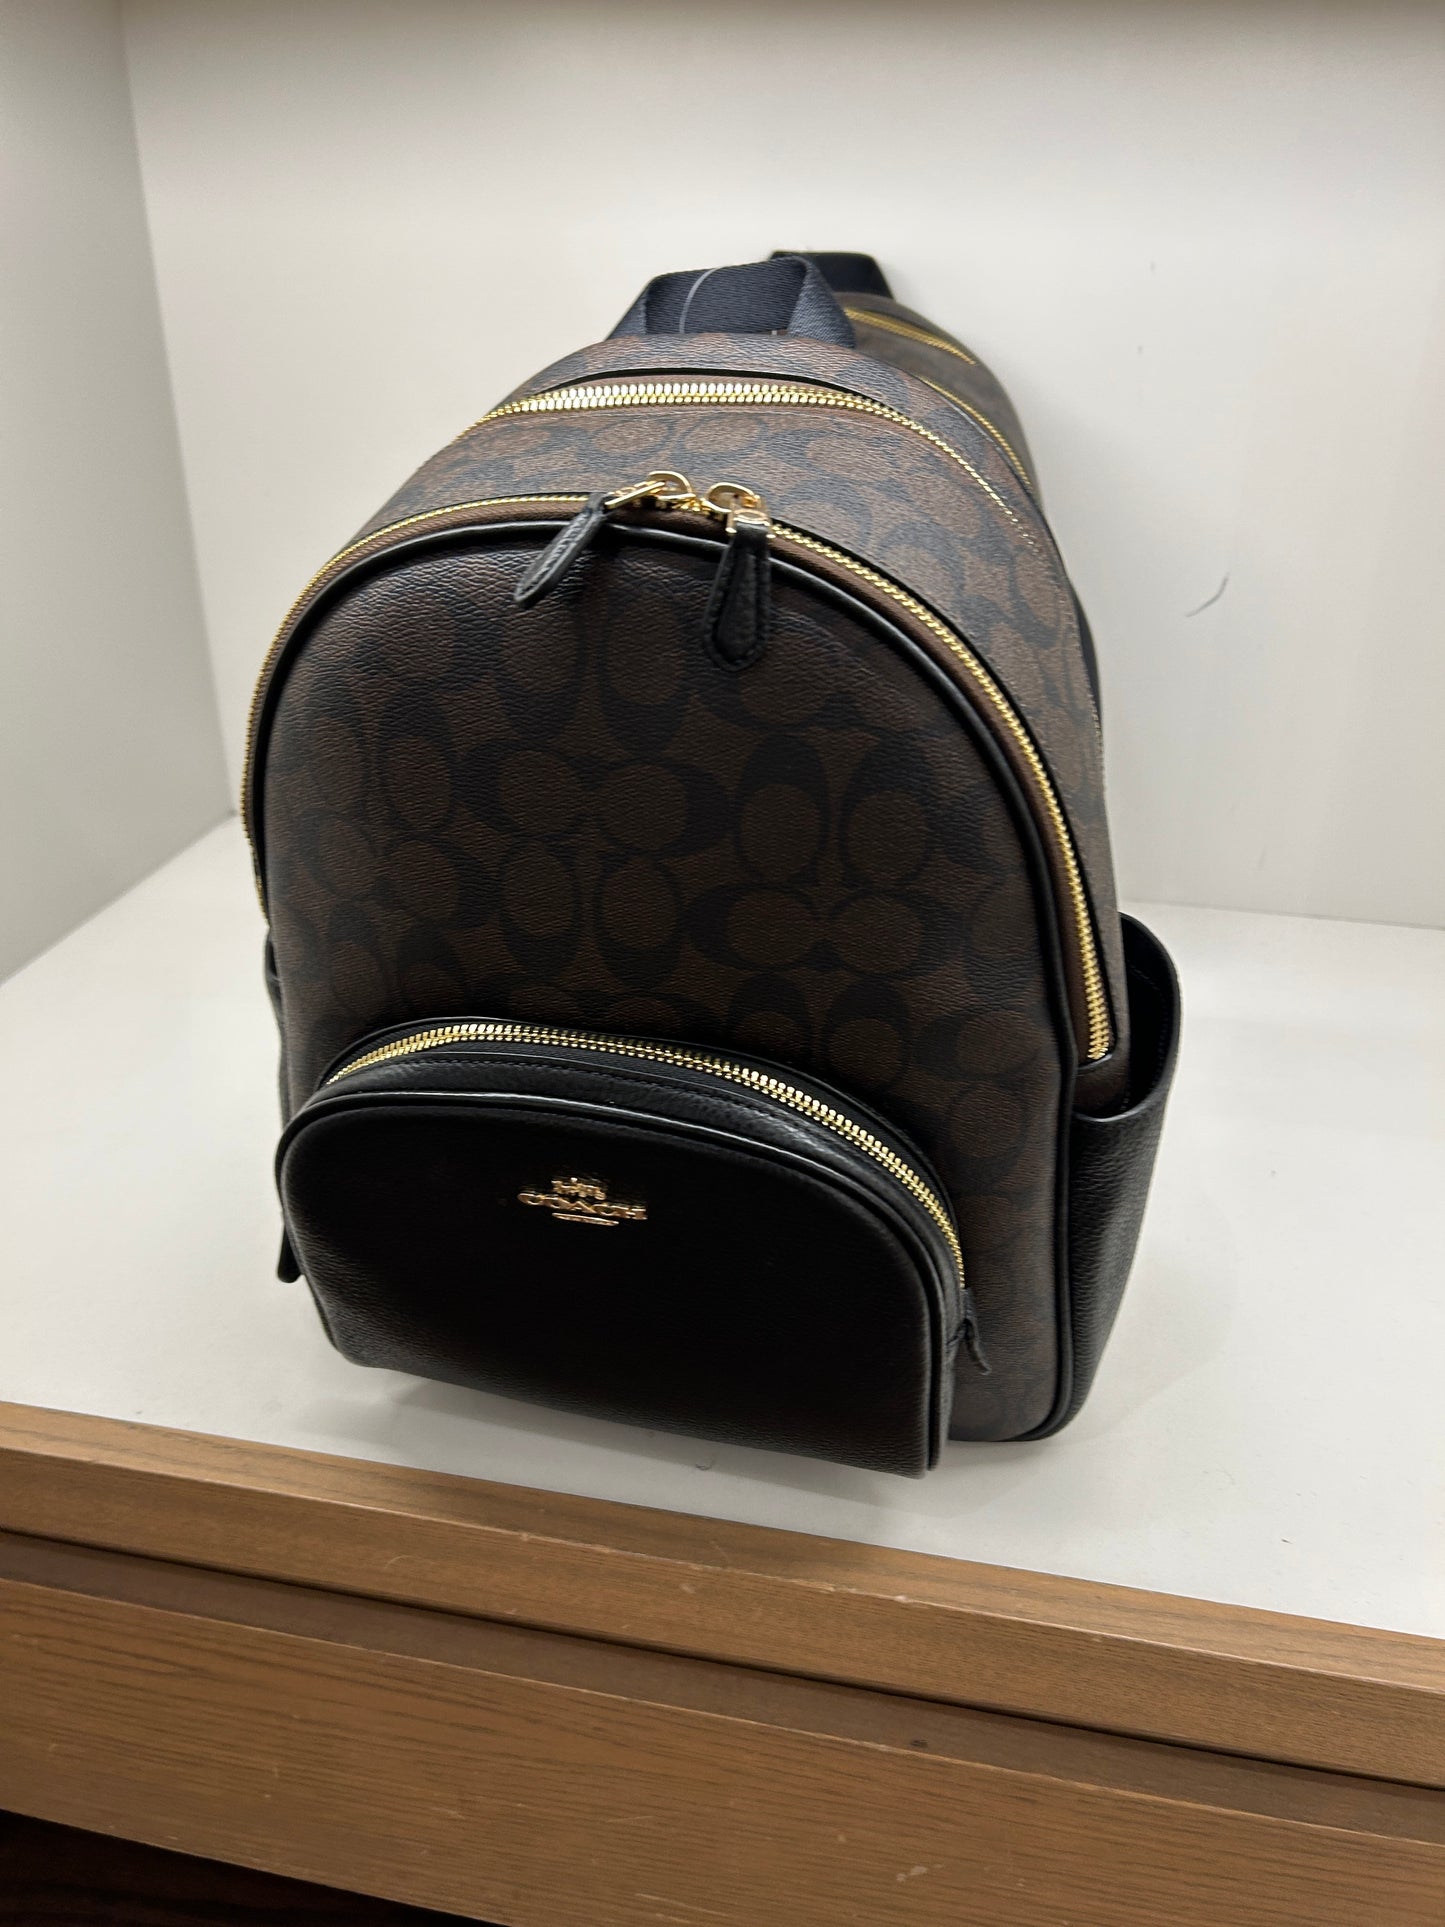 Load image into Gallery viewer, Coach Medium Court Backpack In Signature Brown Black (Pre-Order)
